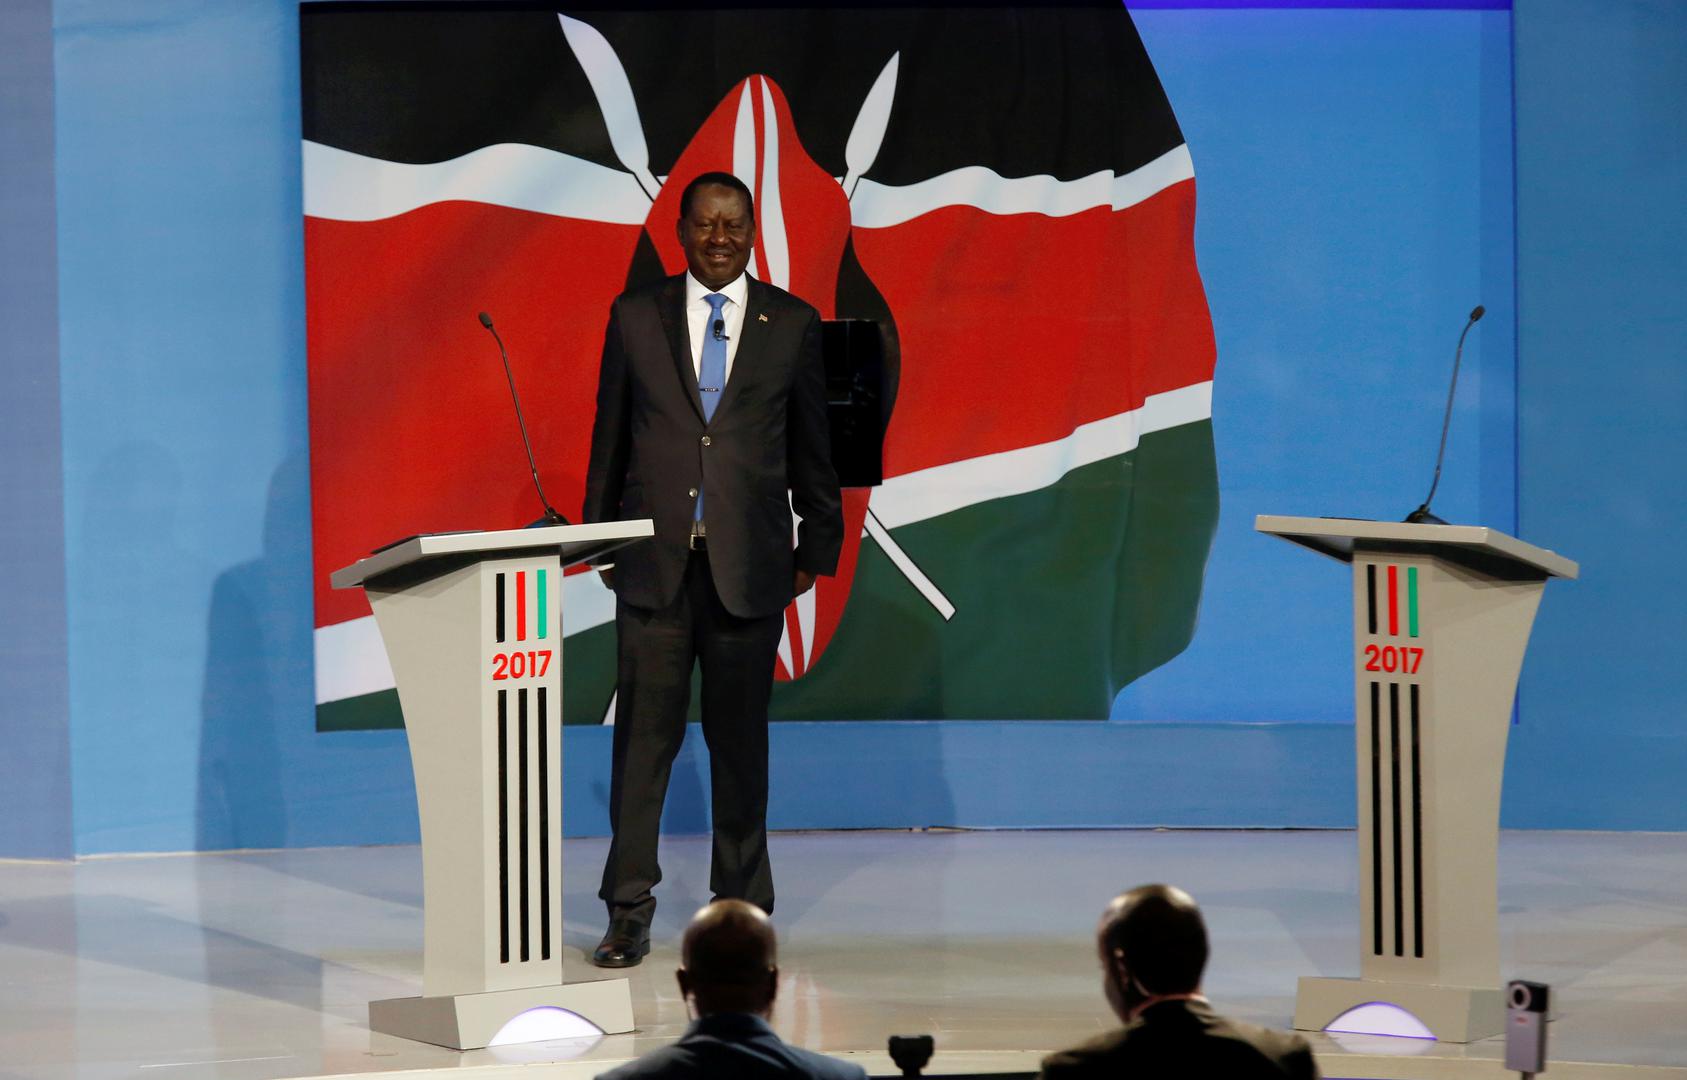 Kenyan opposition leader and presidential candidate Raila Odinga, attends a presidential Debate ahead of the general election in Nairobi, Kenya, July 24, 2017.